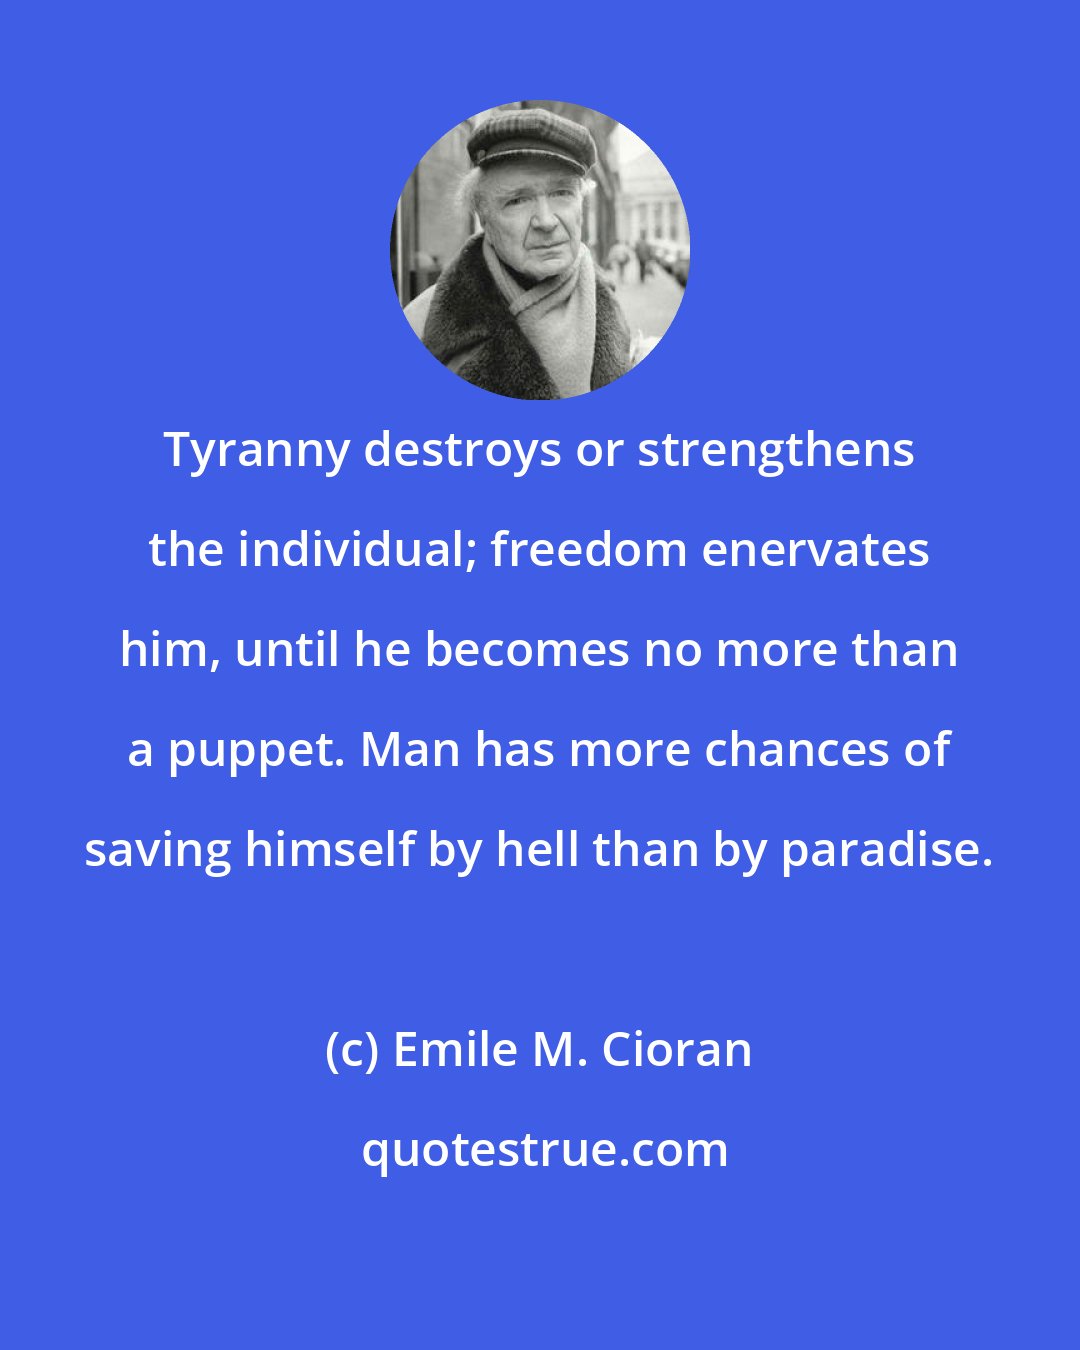 Emile M. Cioran: Tyranny destroys or strengthens the individual; freedom enervates him, until he becomes no more than a puppet. Man has more chances of saving himself by hell than by paradise.